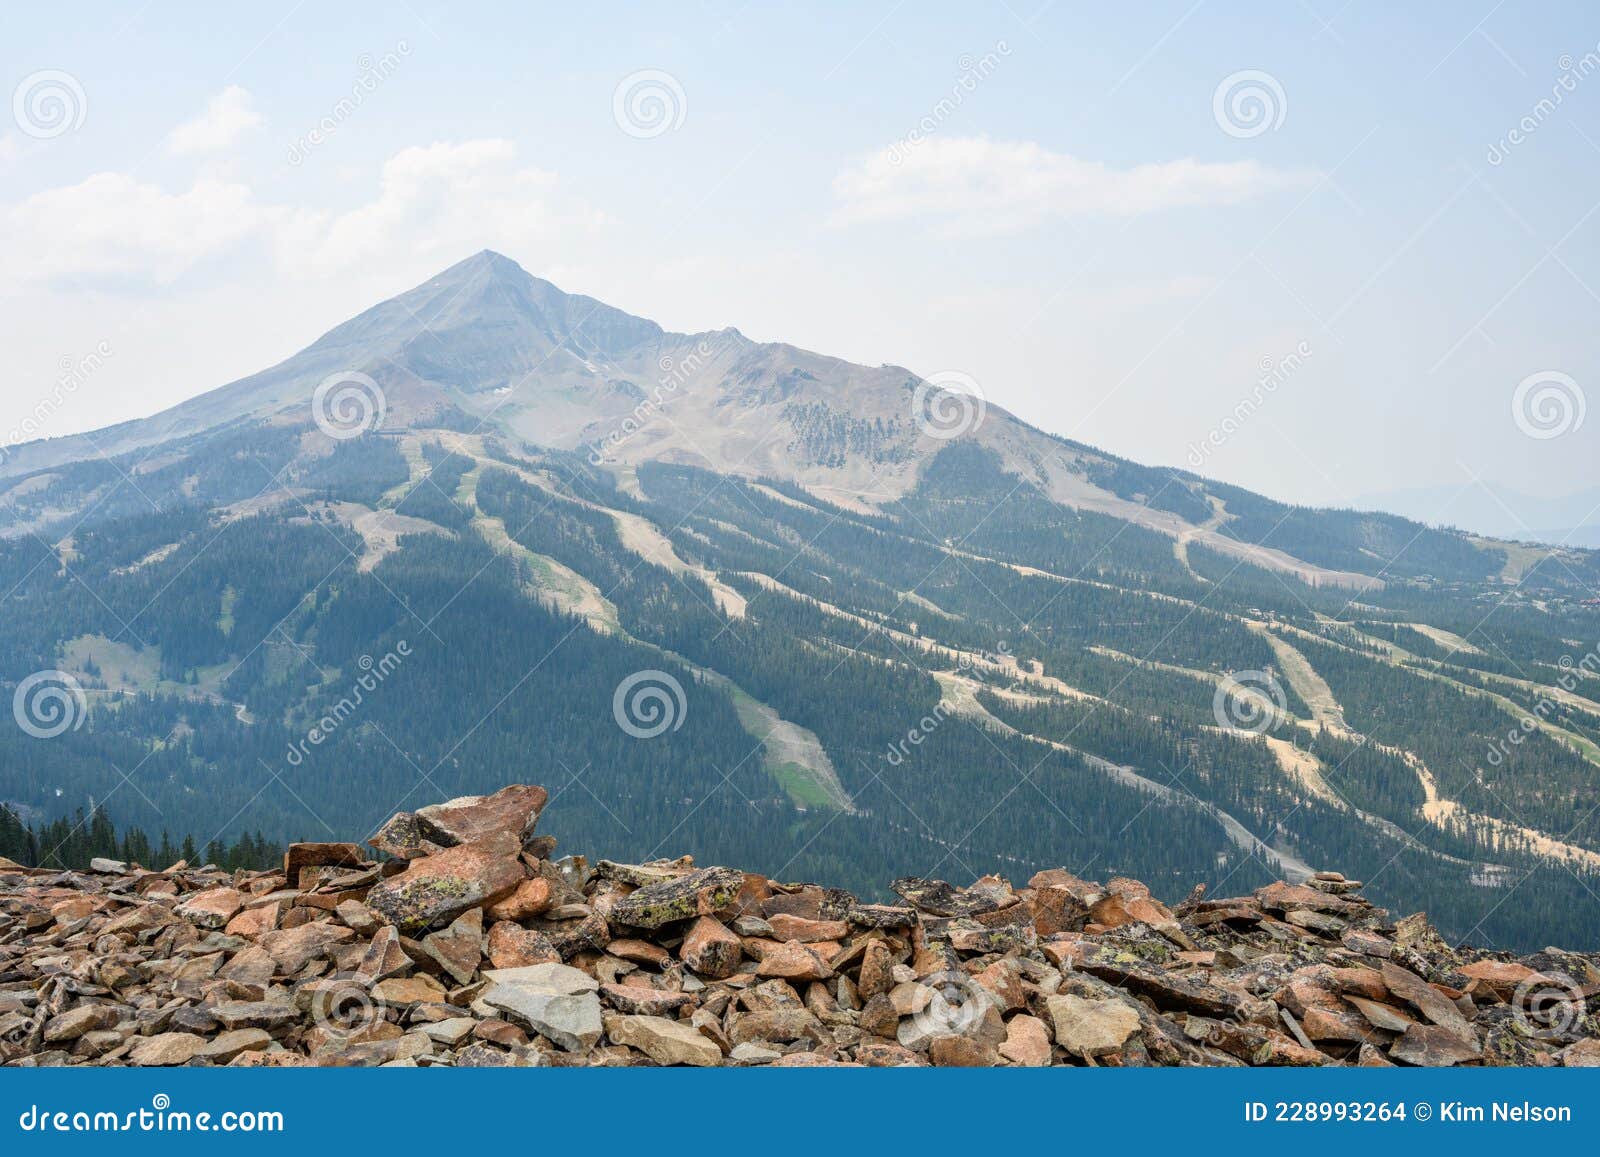 view of lone mountain peak and sky runs, in the summer, from the peak across the valley, big sky, montana